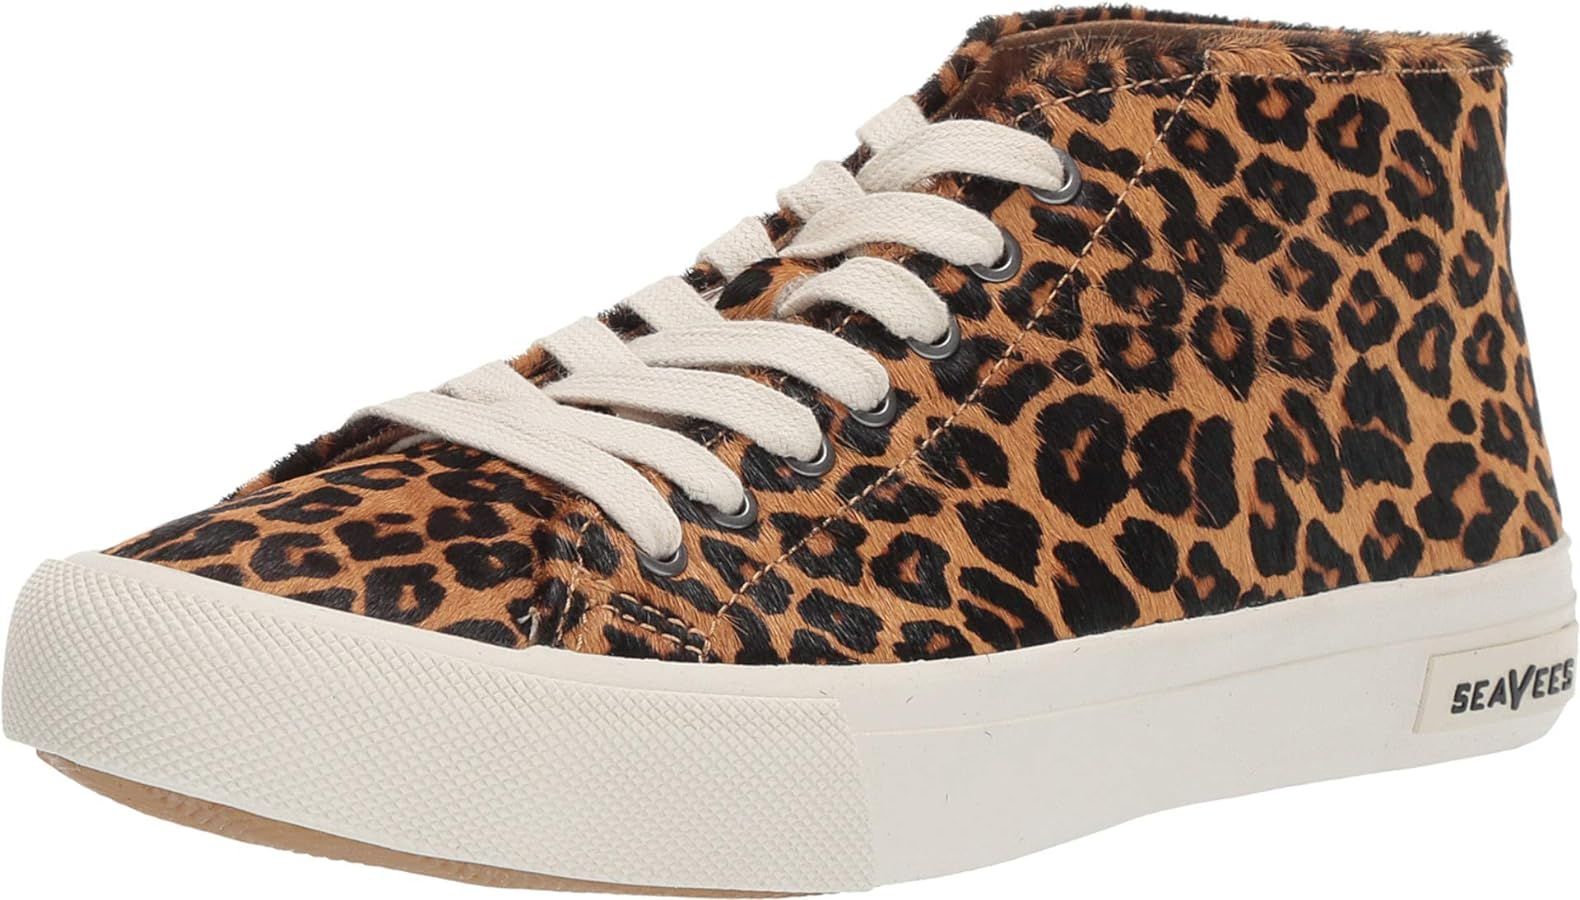 SEAVEES Womens California Special Mulholland Leopard High Sneakers Shoes Casual - Brown | Amazon (US)